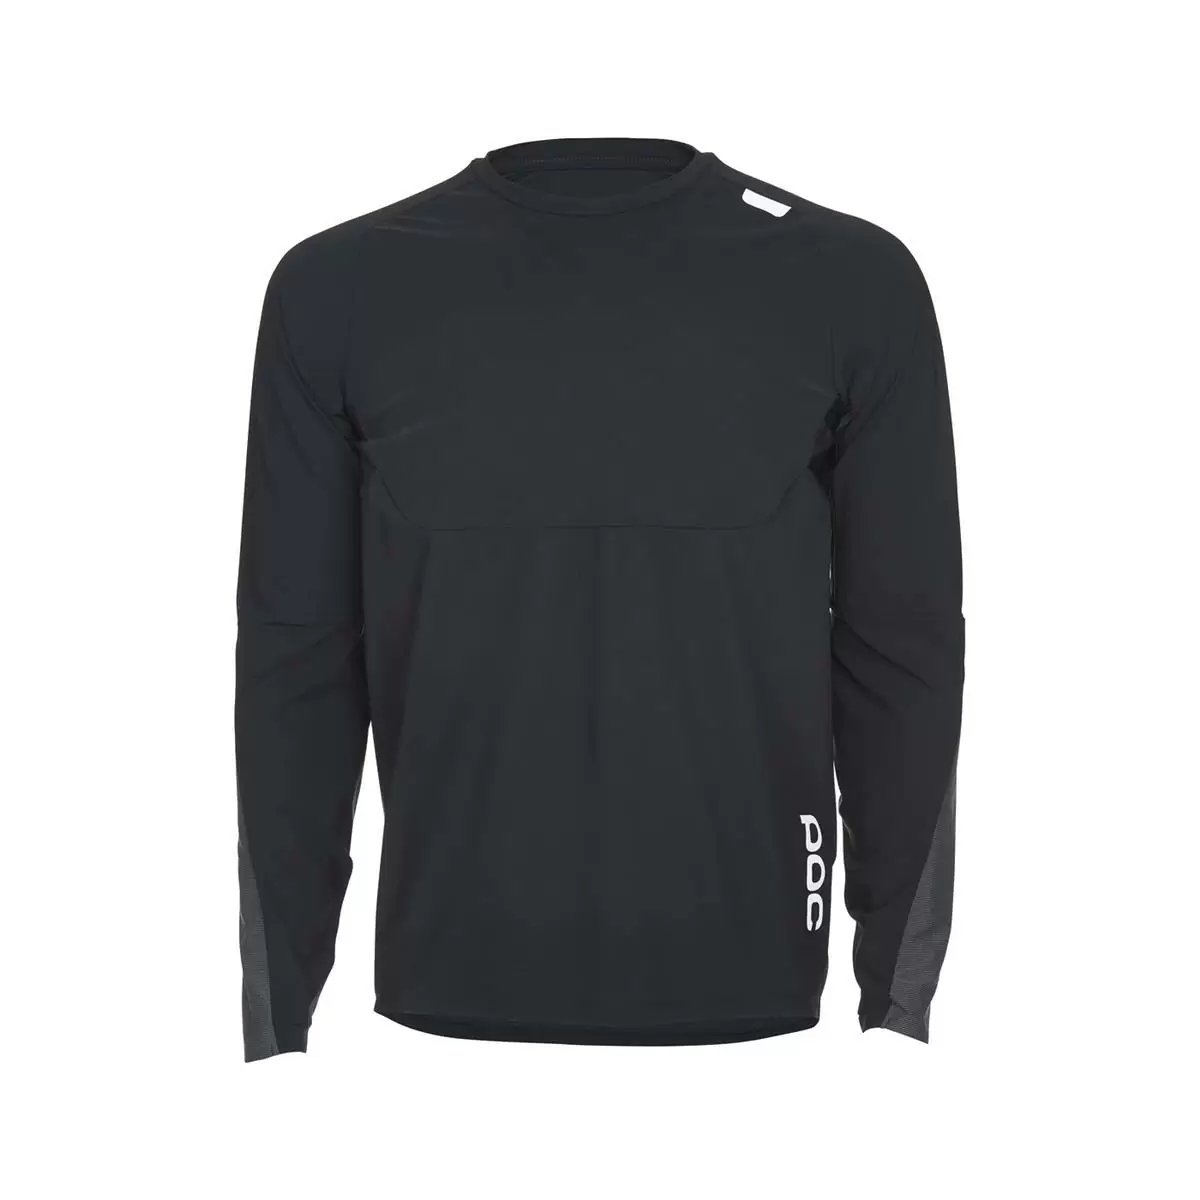 Resistance DH Long-Sleeve Jersey Black Size XS - image